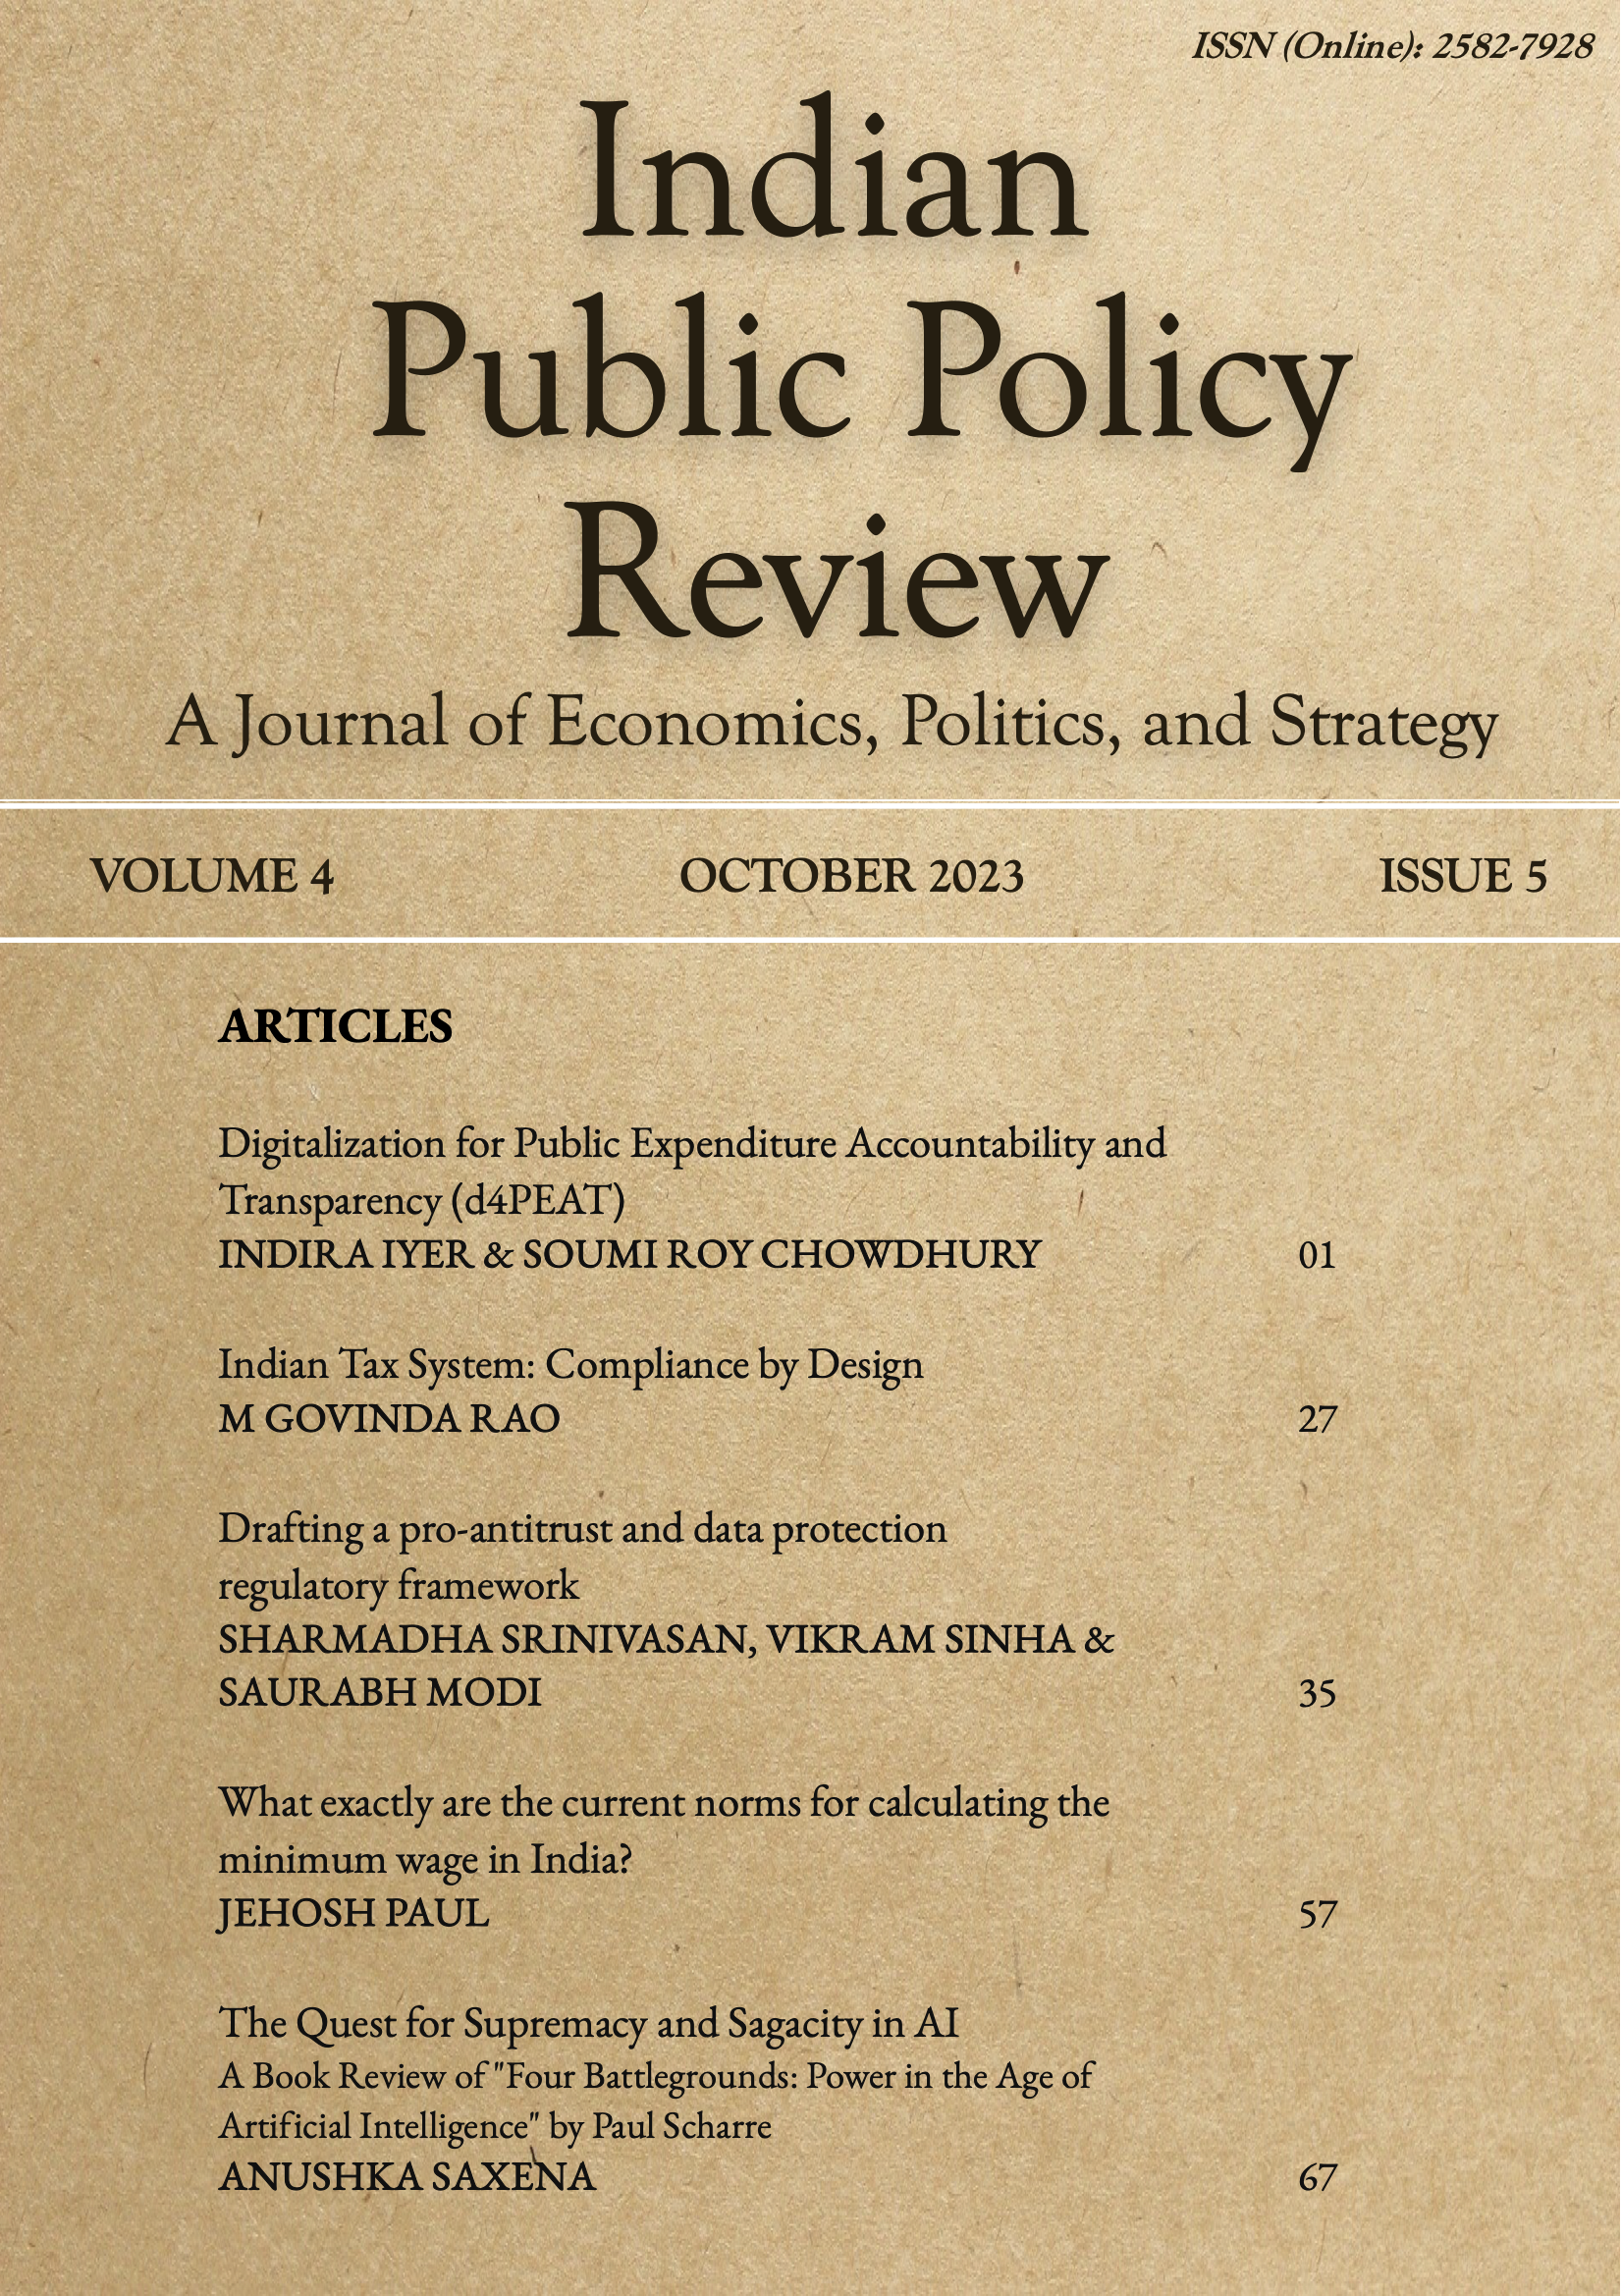 					View Vol. 4 No. 5 (Sep-Oct) (2023): Indian Public Policy Review
				